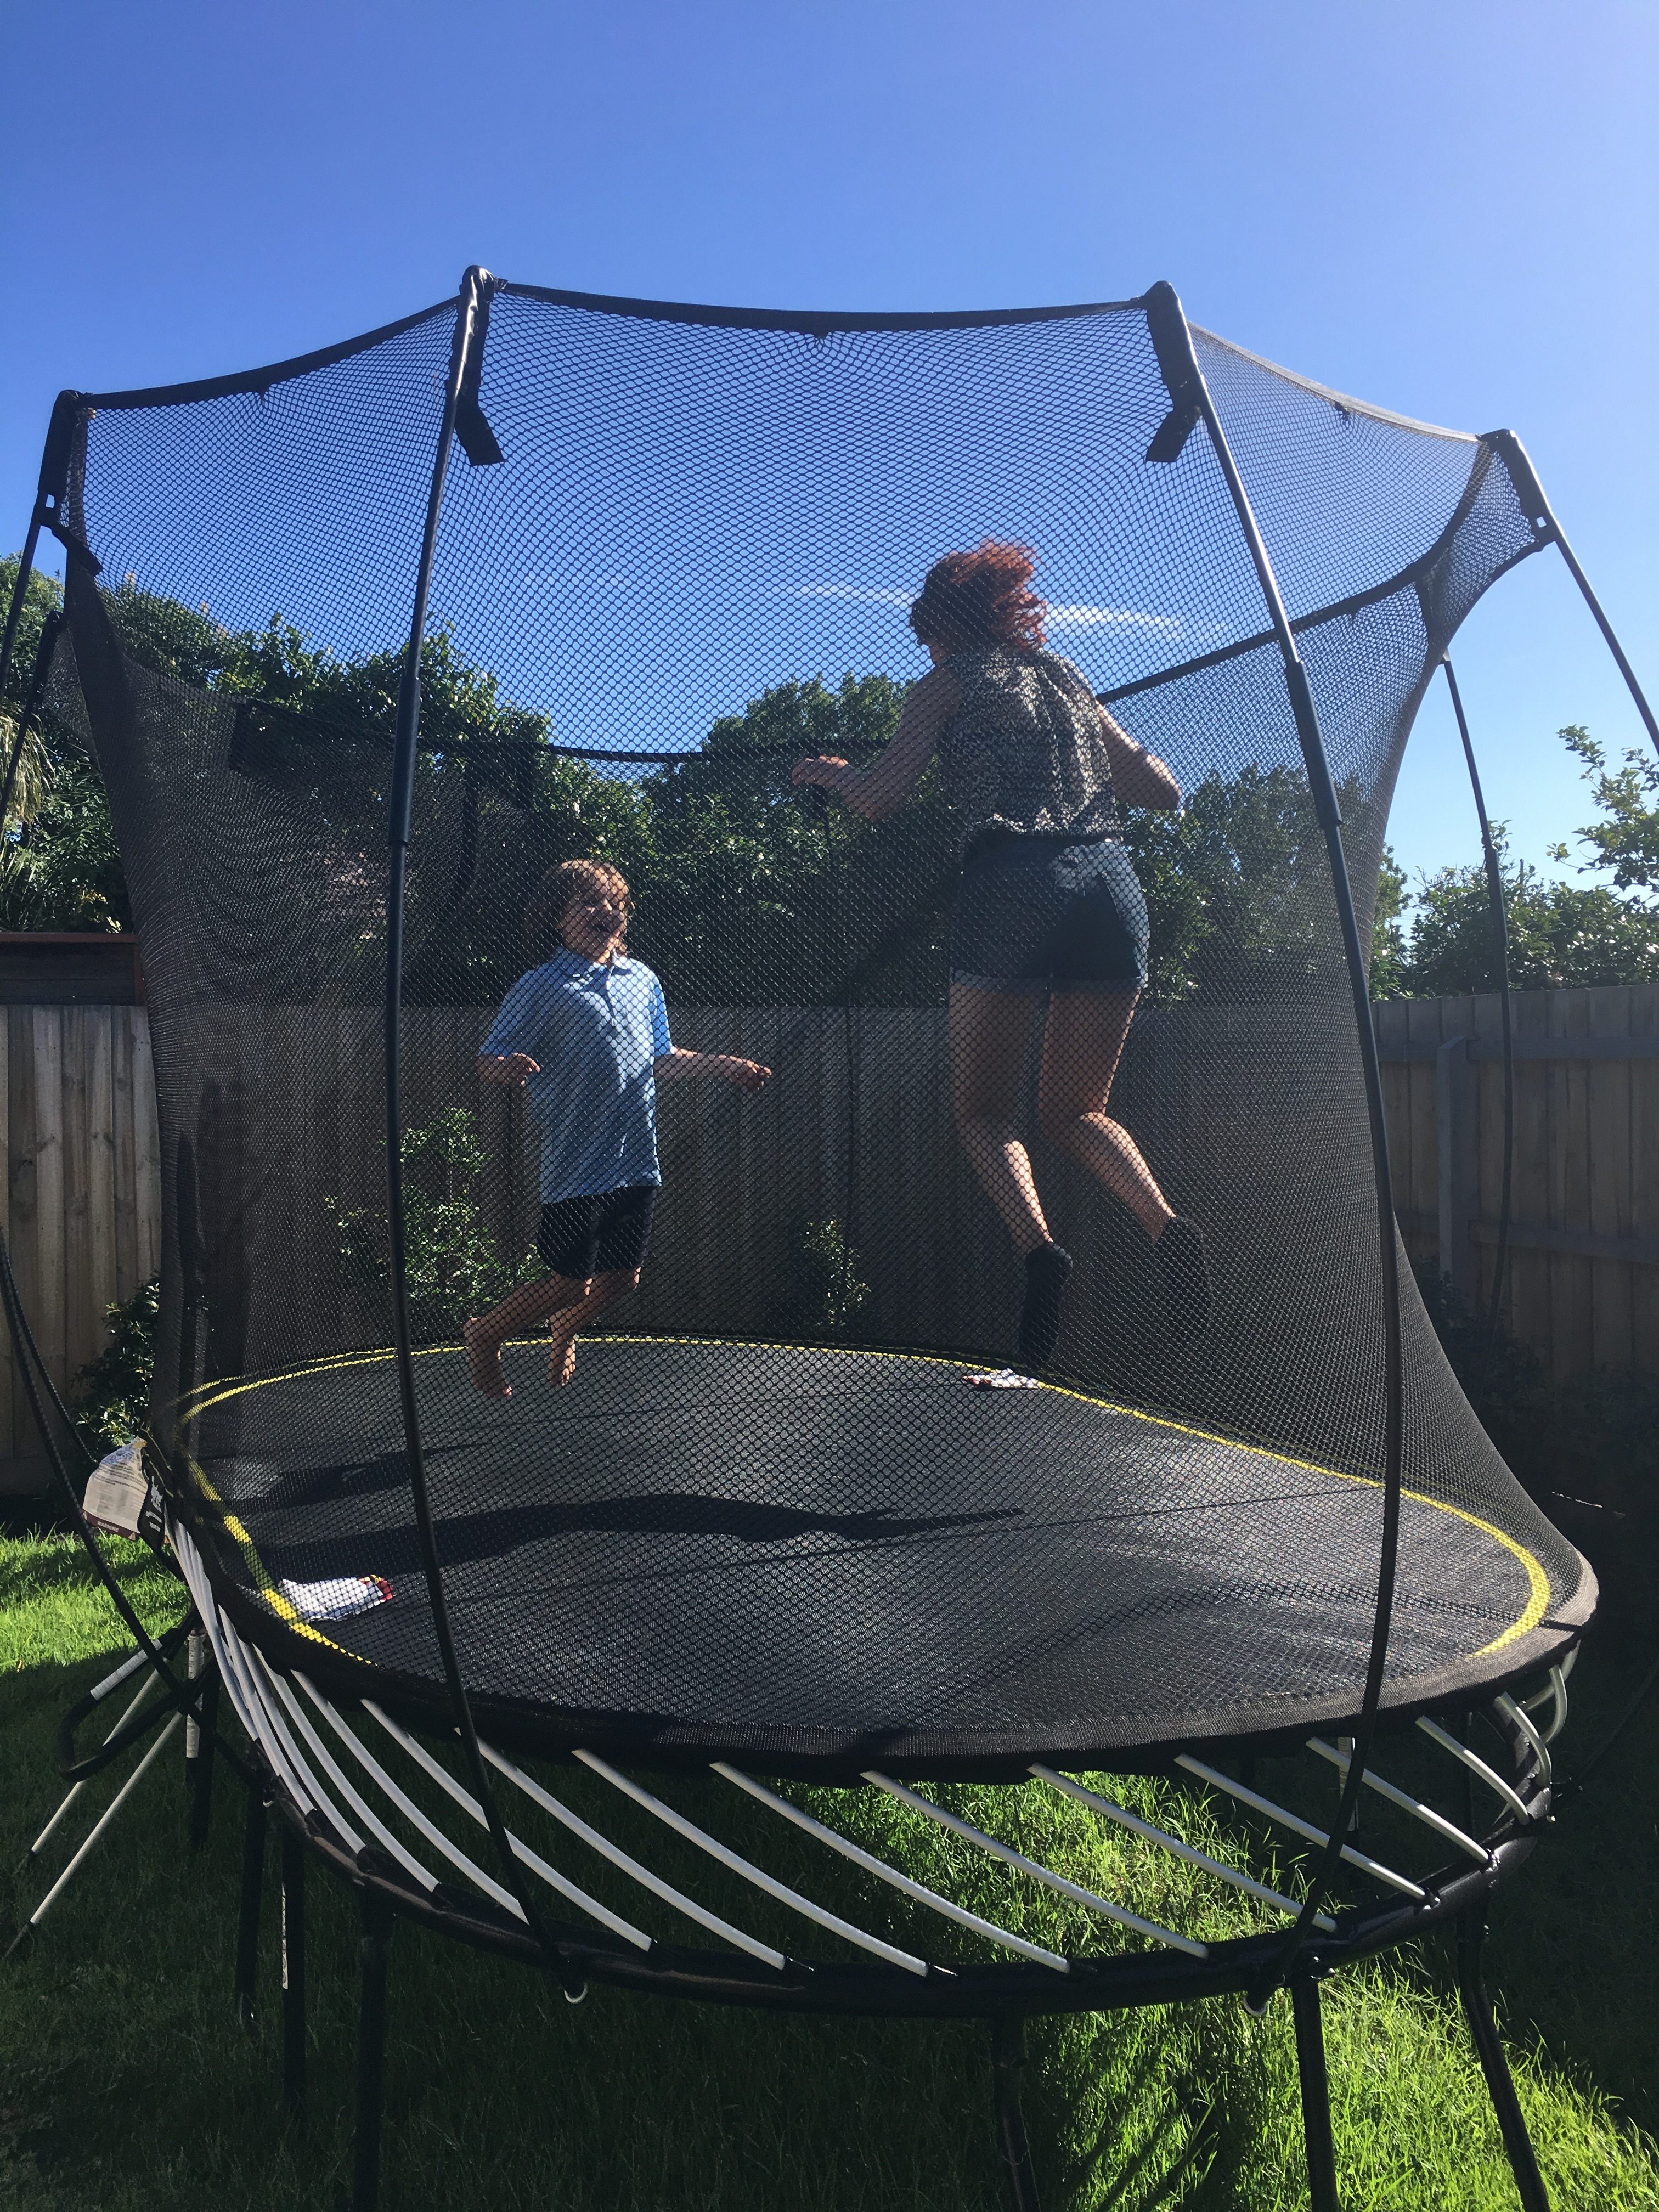 The perks of being an au pair: a trampoline in the garden!